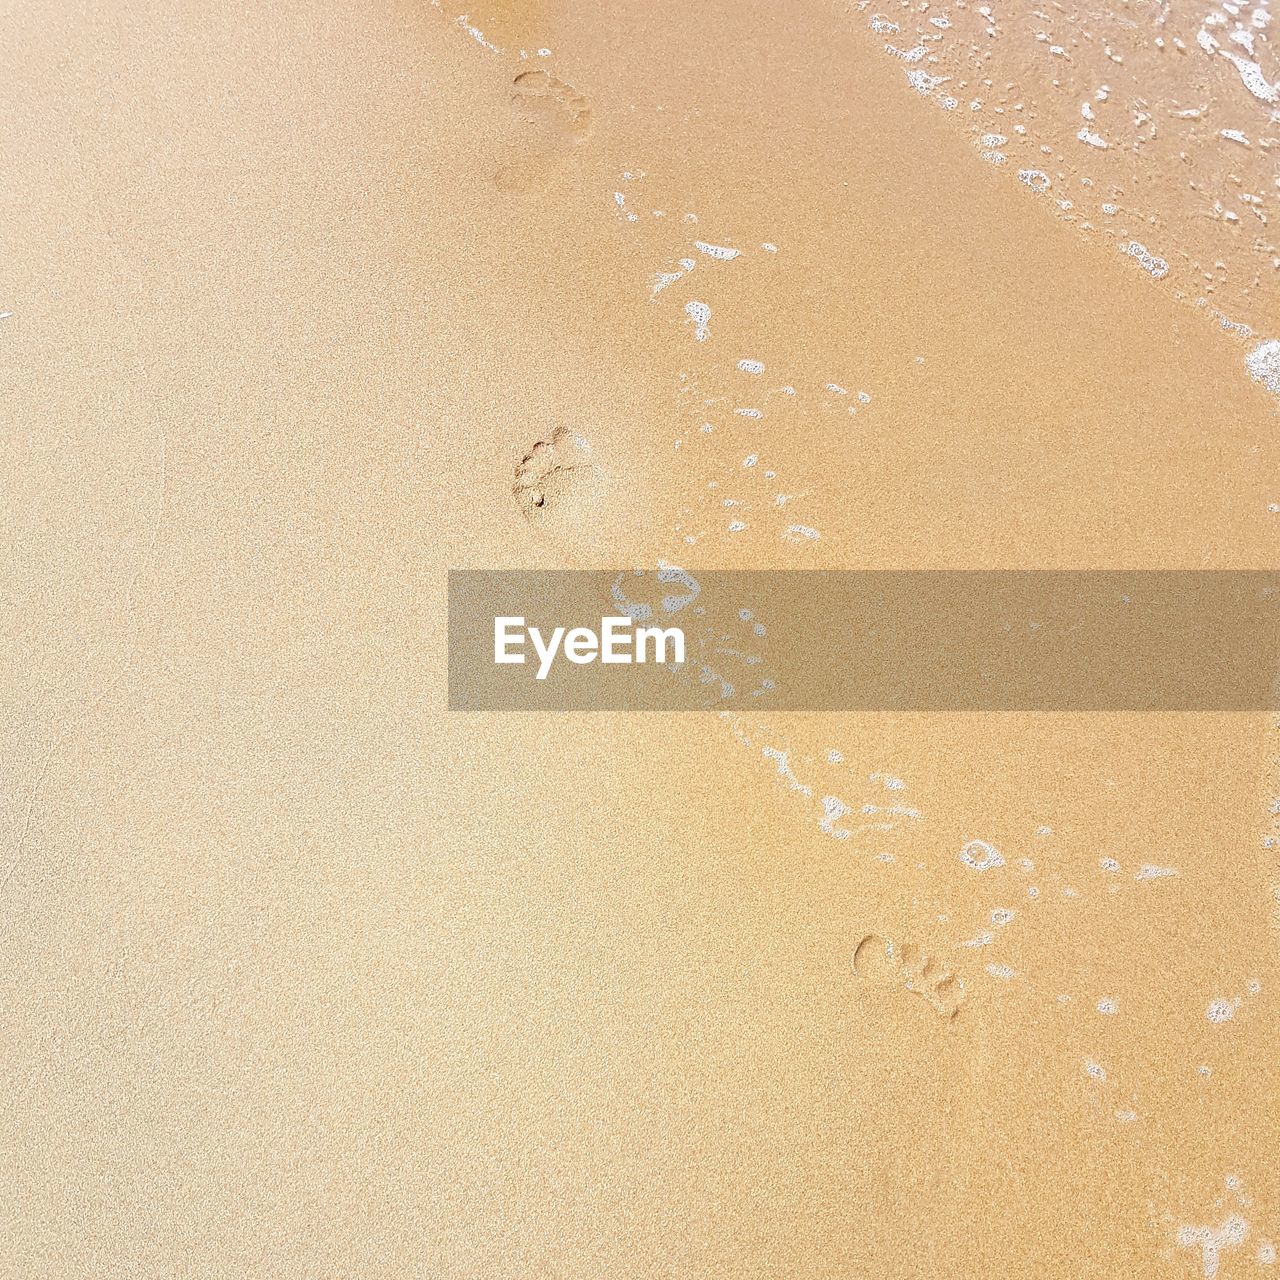 HIGH ANGLE VIEW OF FOOTPRINTS ON WET BEACH